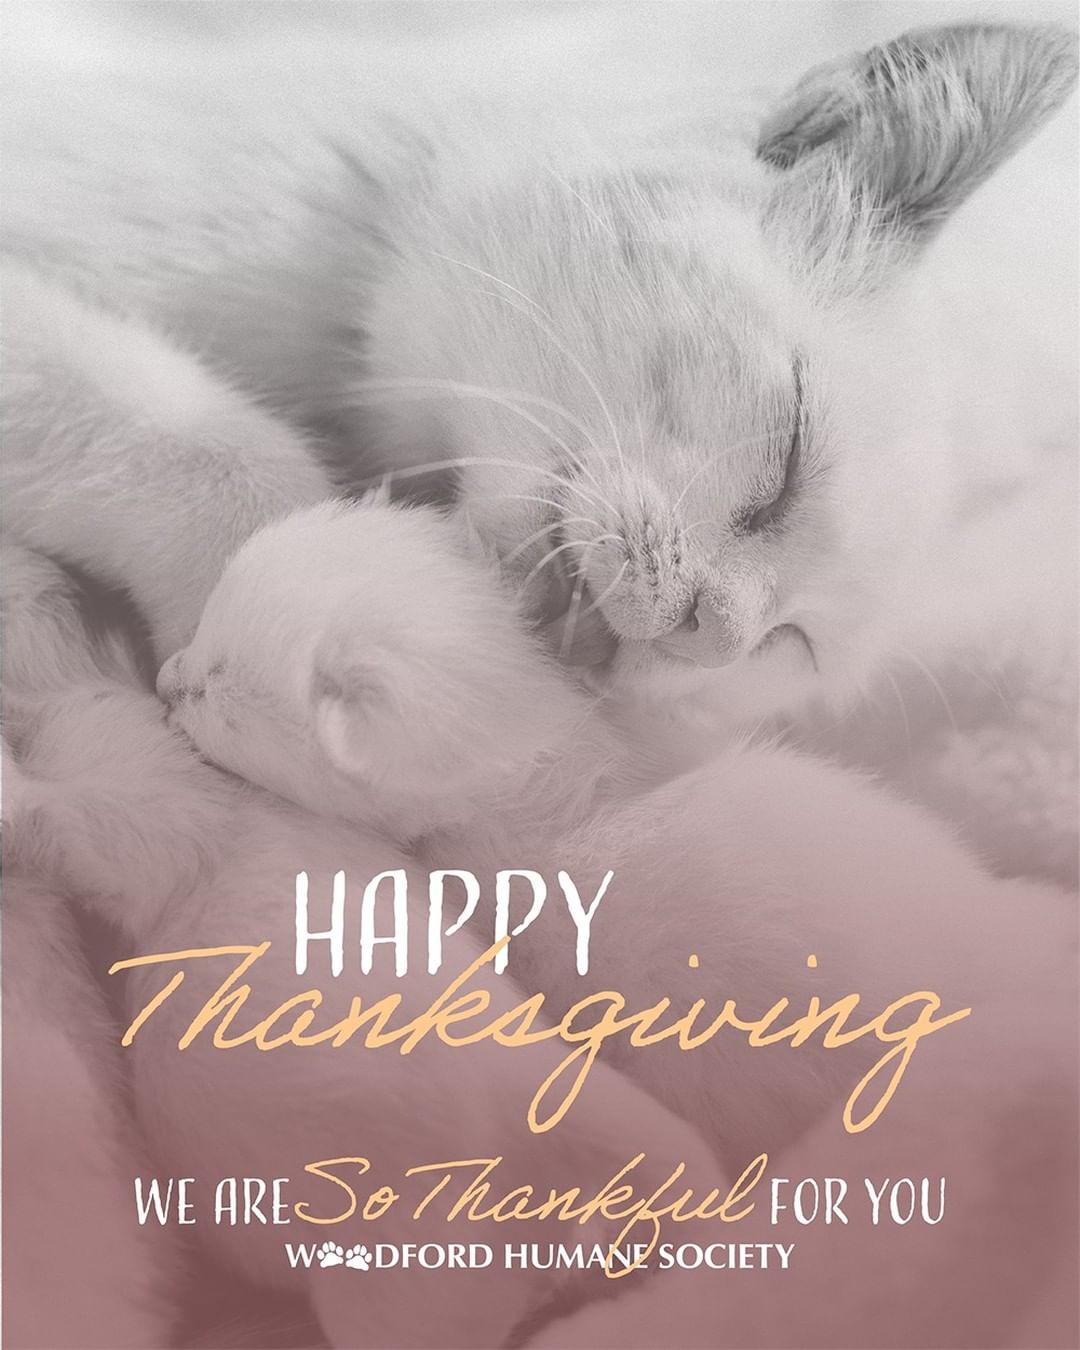 We have the best friends we could ever ask for, and for that we will always be thankful ❤️

The Adoption Center will be closed Thursday, November 25 for the holiday - we'll be back at noon on Friday if we have escaped the food comas by then. Stay safe, enjoy your celebrations, and sneak a green bean or two to your dog.